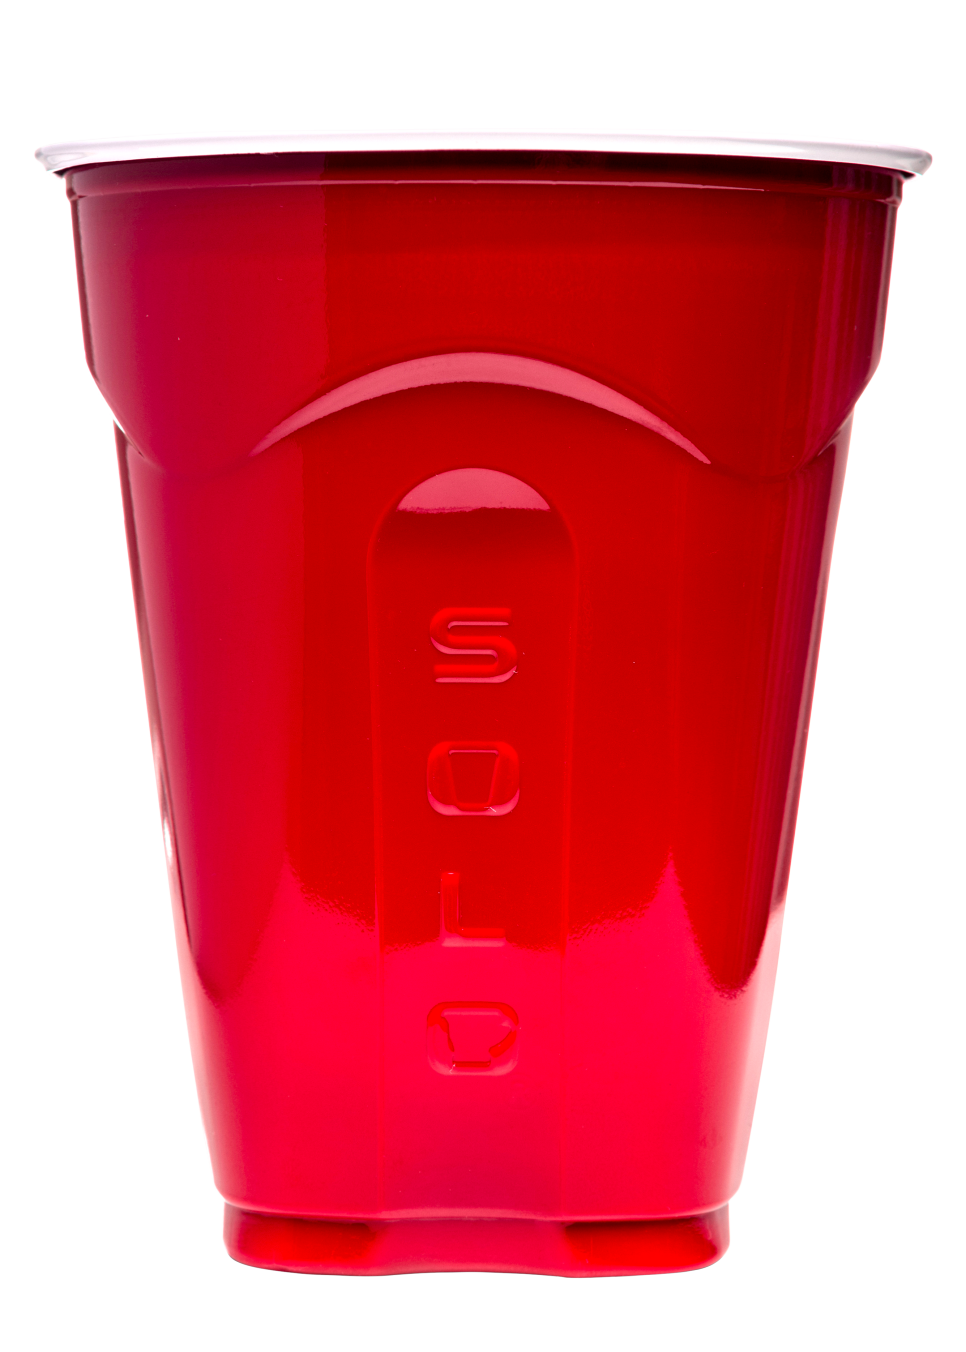 Solo red plastic cup